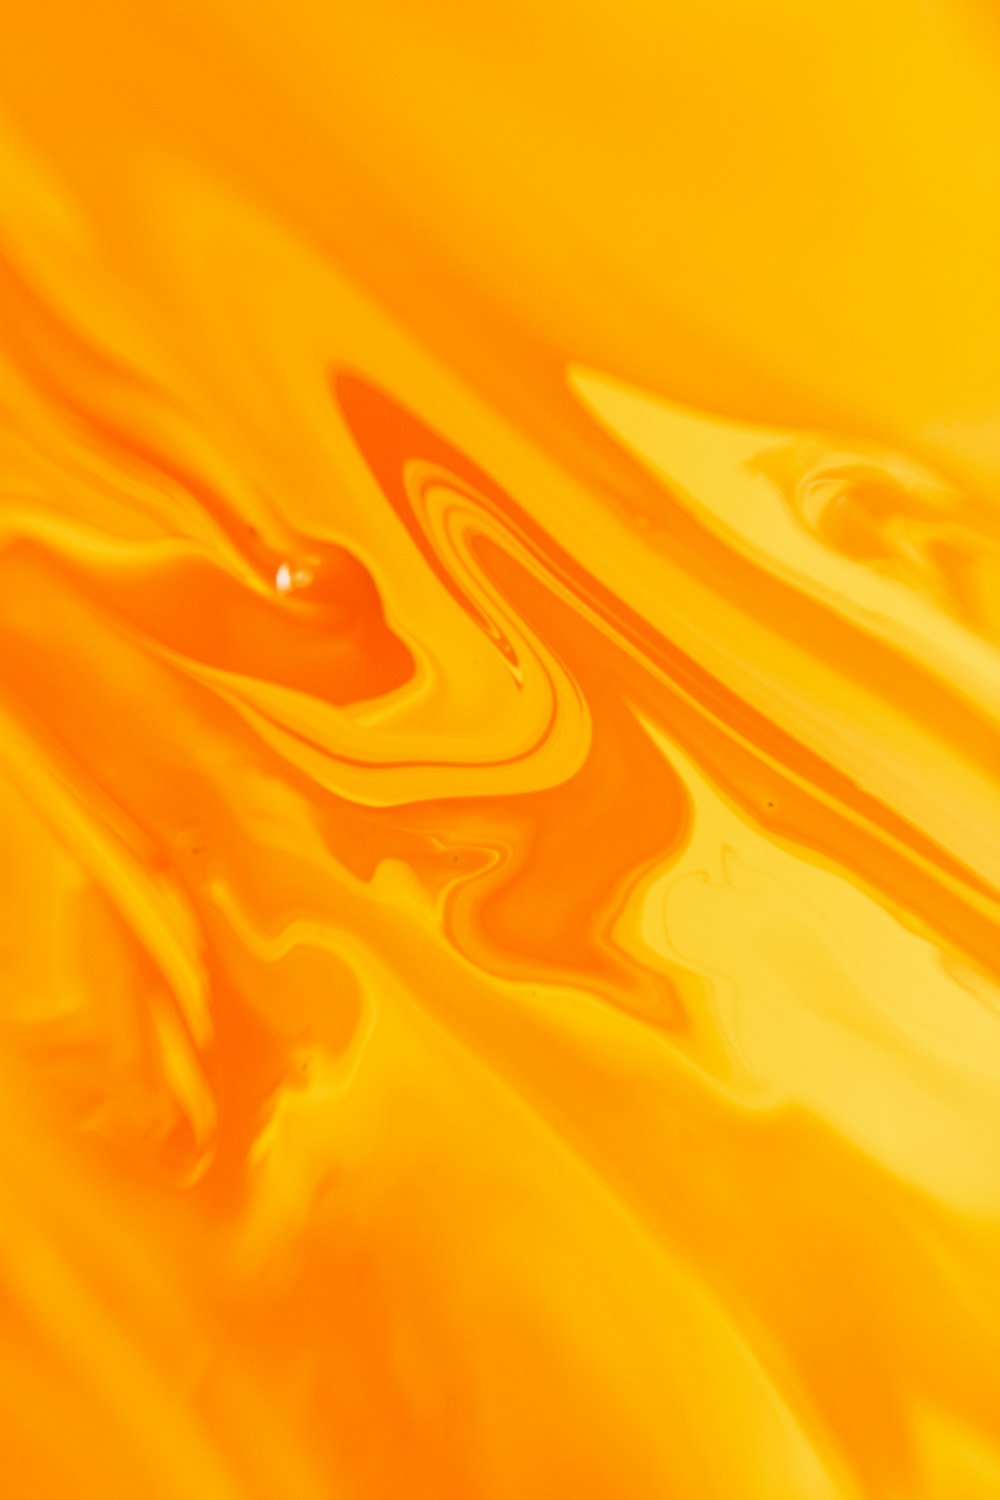 a close up view of a yellow liquid